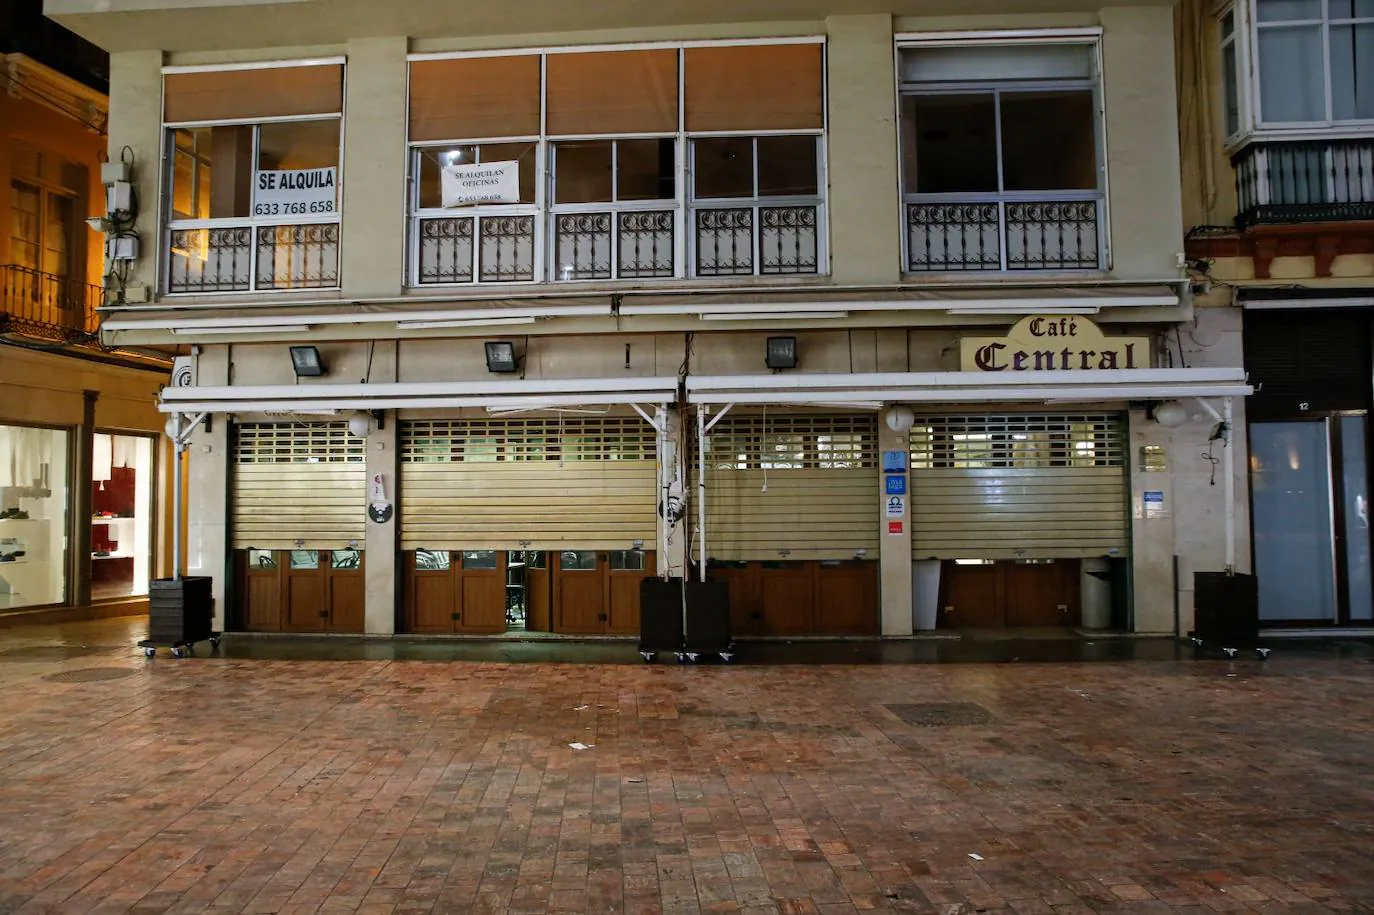 The emblematic establishment lowers its shutters for the last time after a century of trade in the city centre.